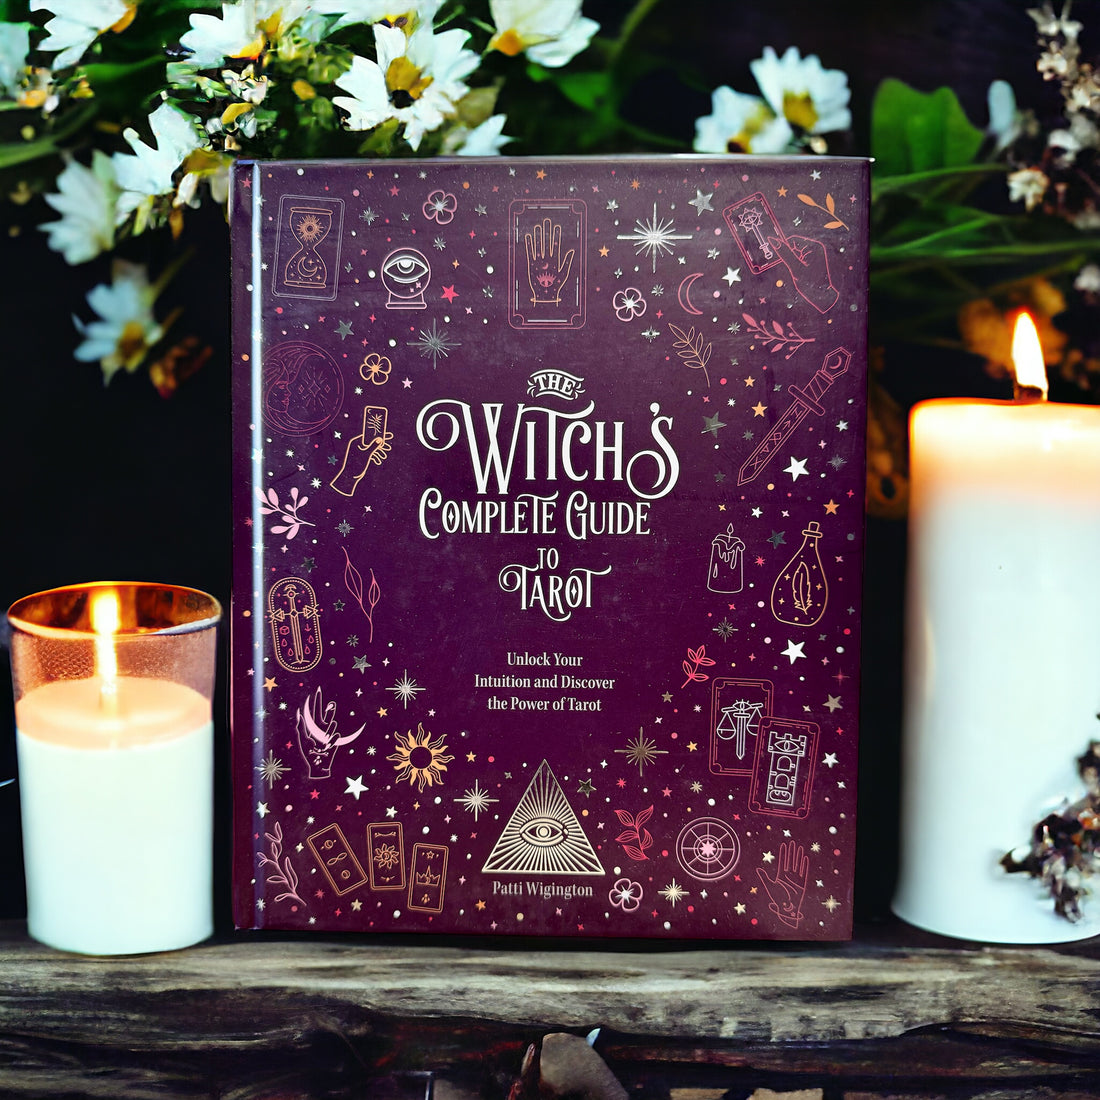 The Witch’s Complete Guide To Tarot